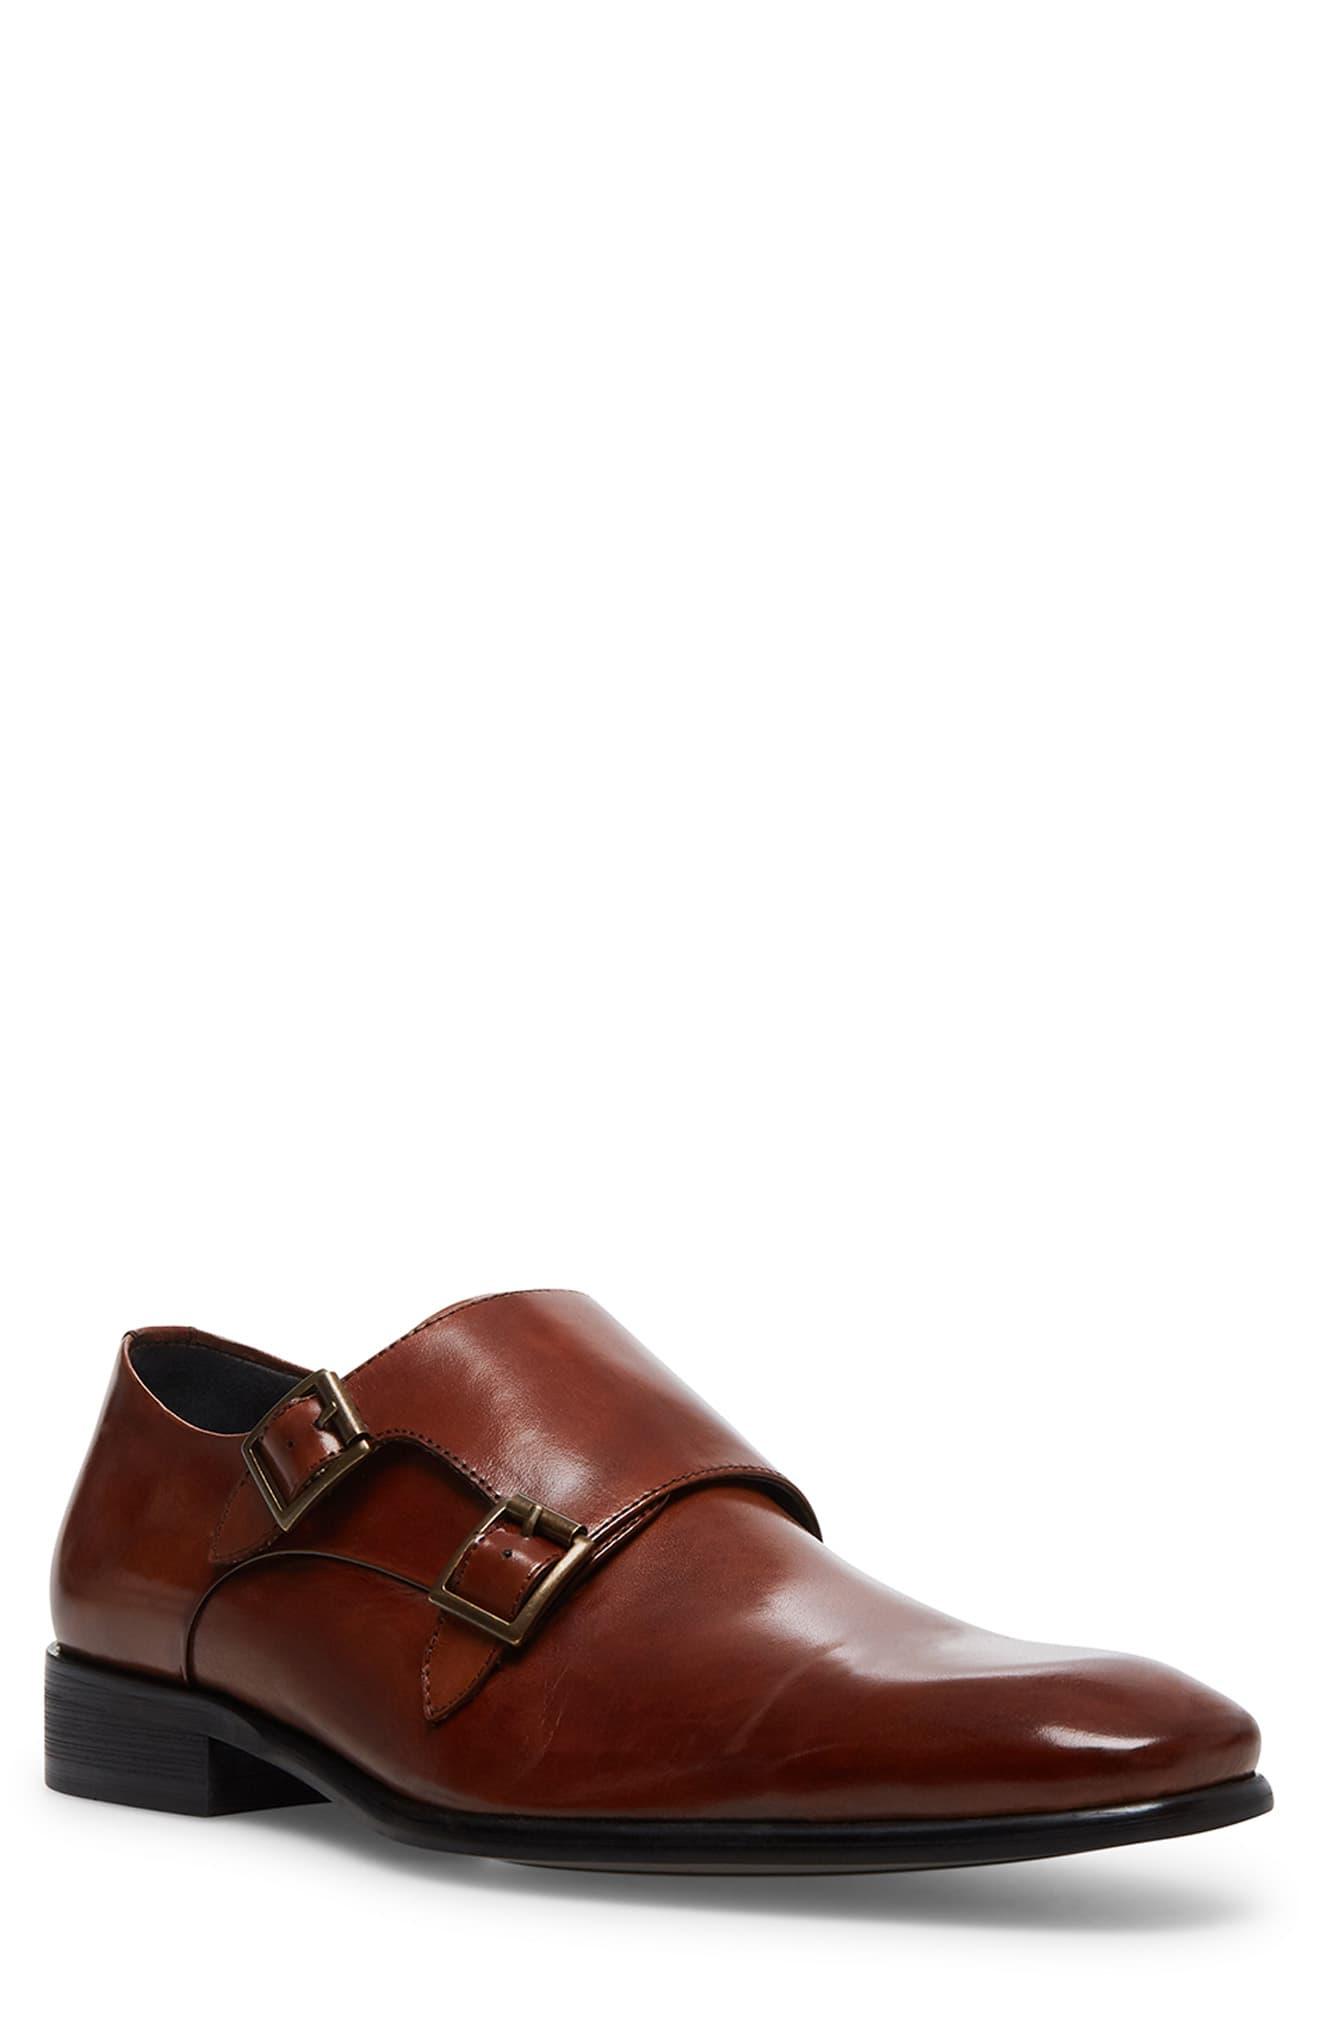 Steve Madden Leather Beaumont Double Monk Strap Shoe in Cognac Leather ...